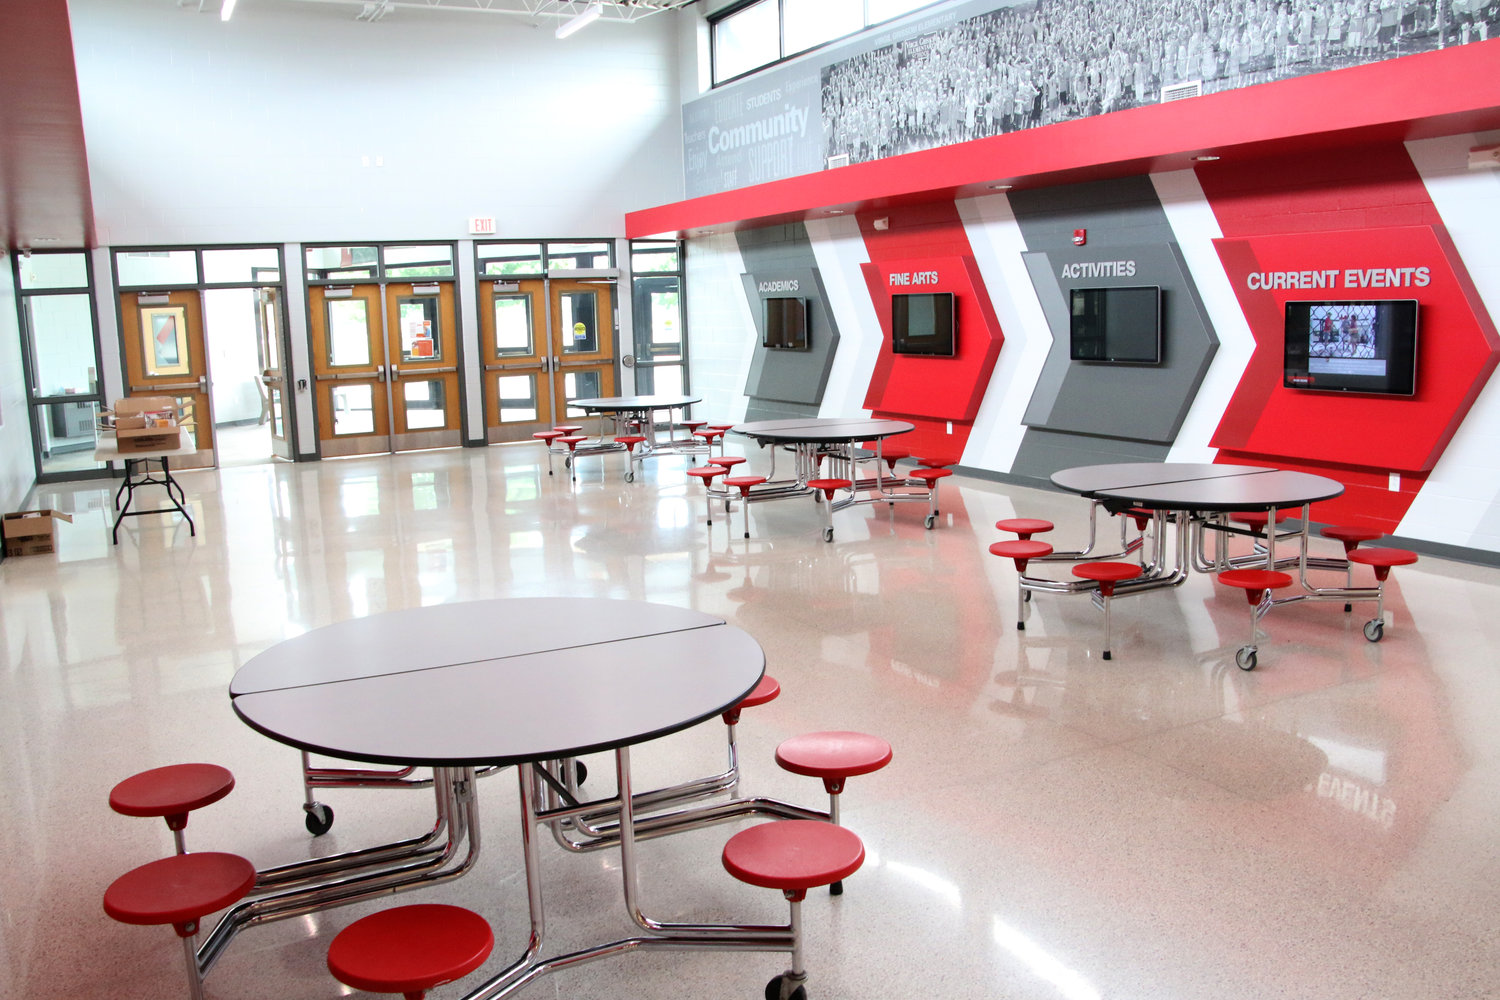 North Scott High School students will find lunch tables in lobby areas and The Pit, another accommodation for the governor's order that districts prepare for students to return to school buildings next month.